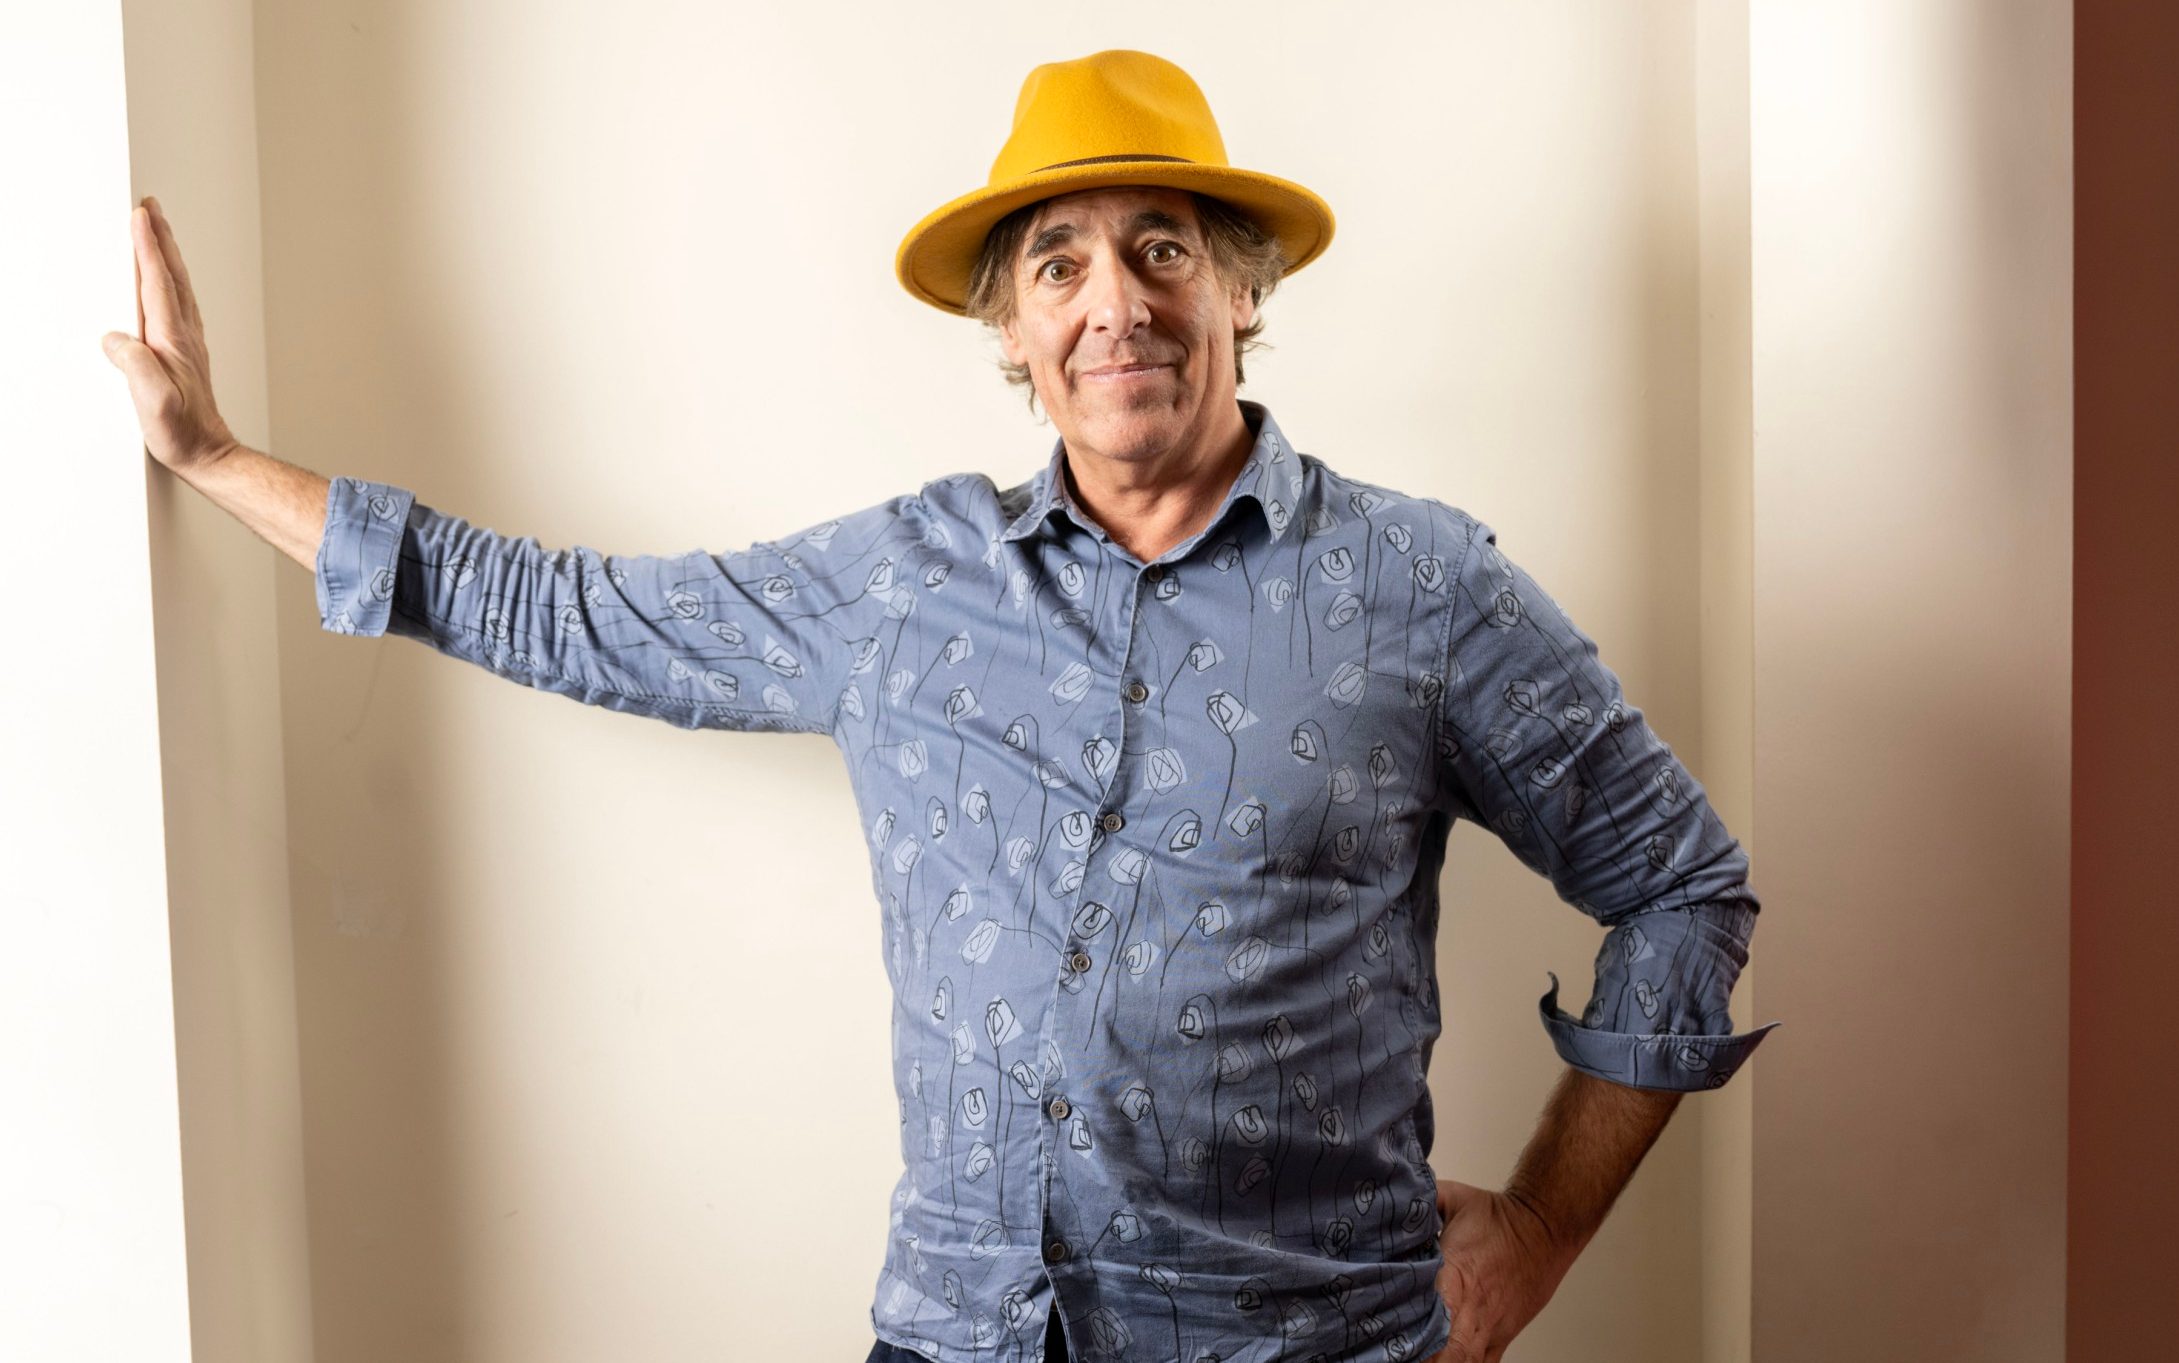 comedian mark steel: ‘the hospital lost my biopsy result – then the cancer surgery went a bit wrong’